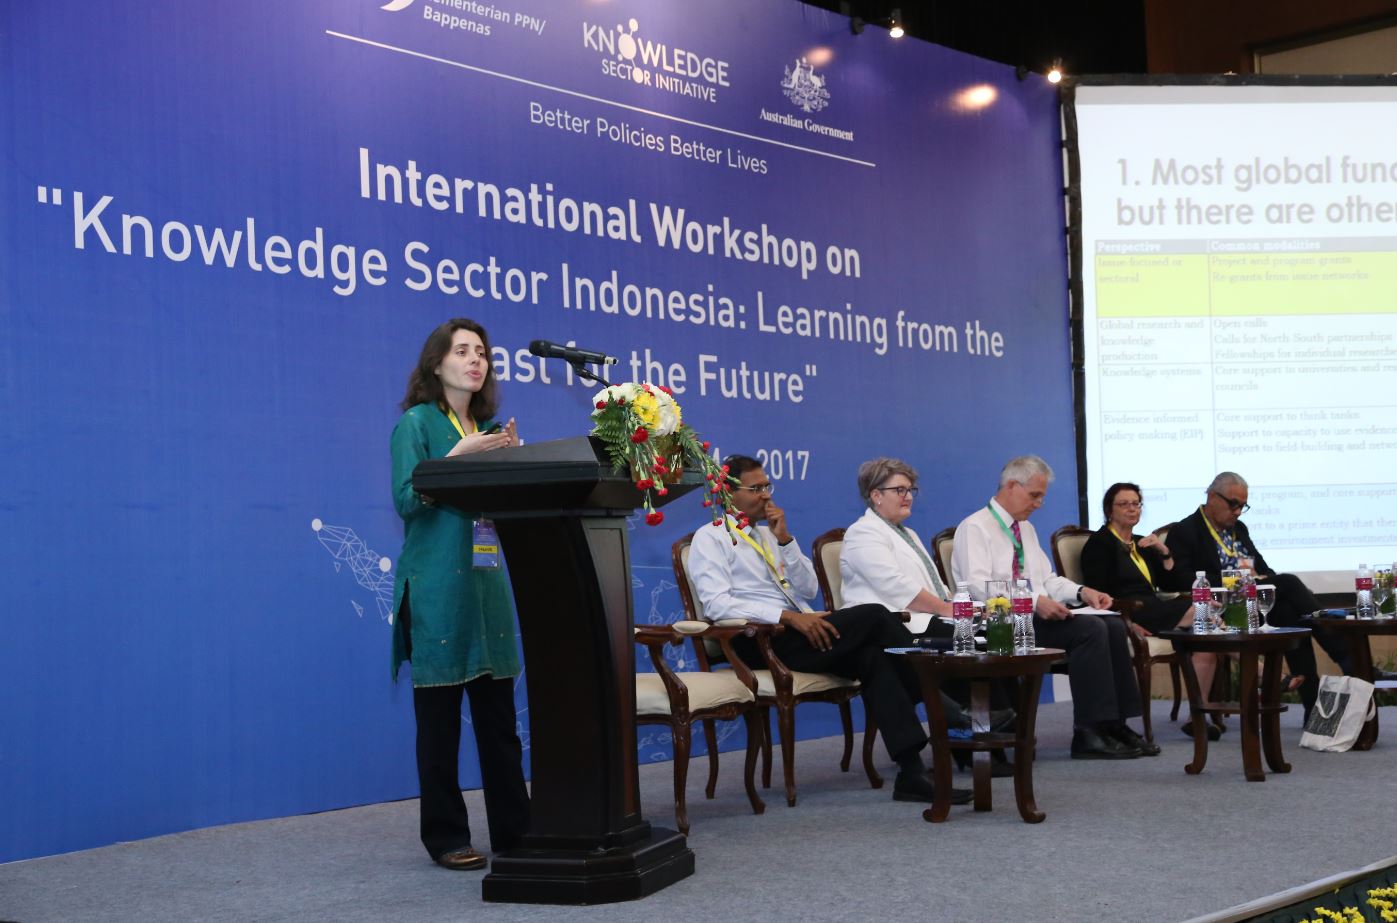 International workshop on the Knowledge Sector in Indonesia: Learning from the past for the future